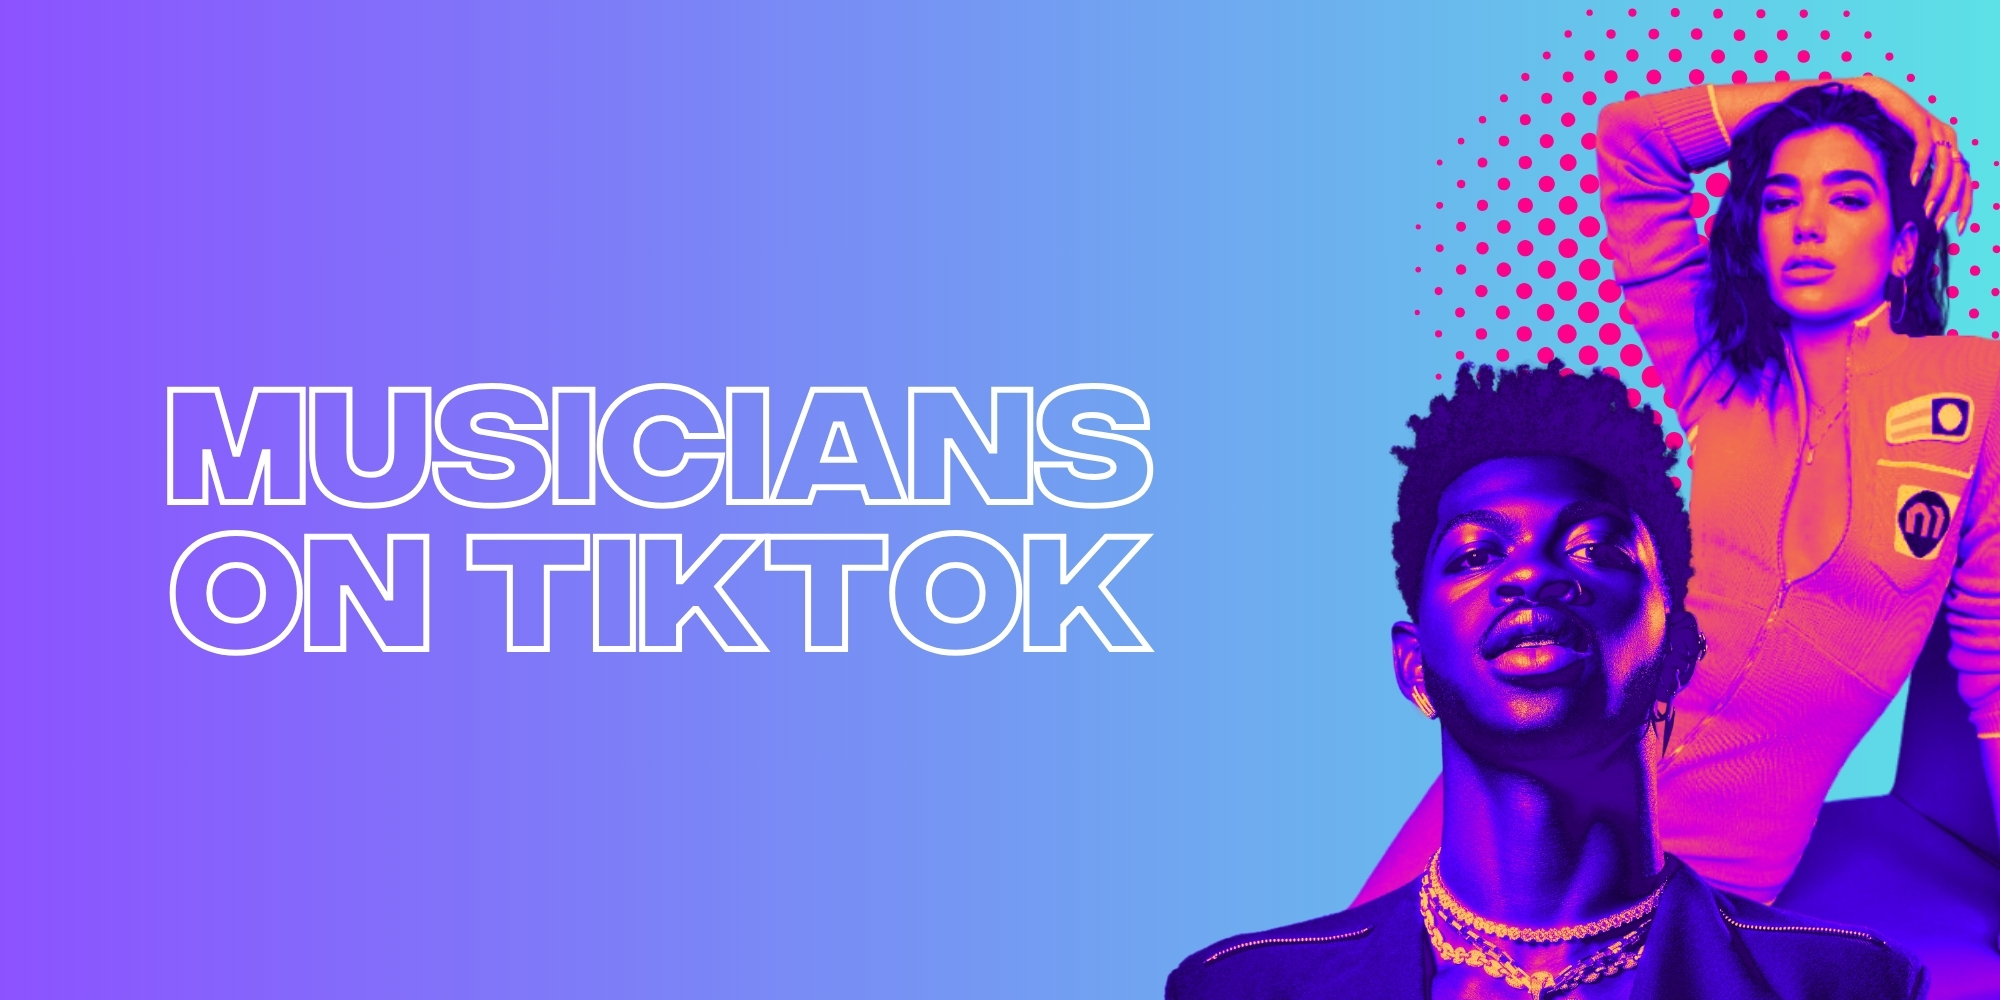 Music On TikTok: With UMG Gone, Who is Left? 